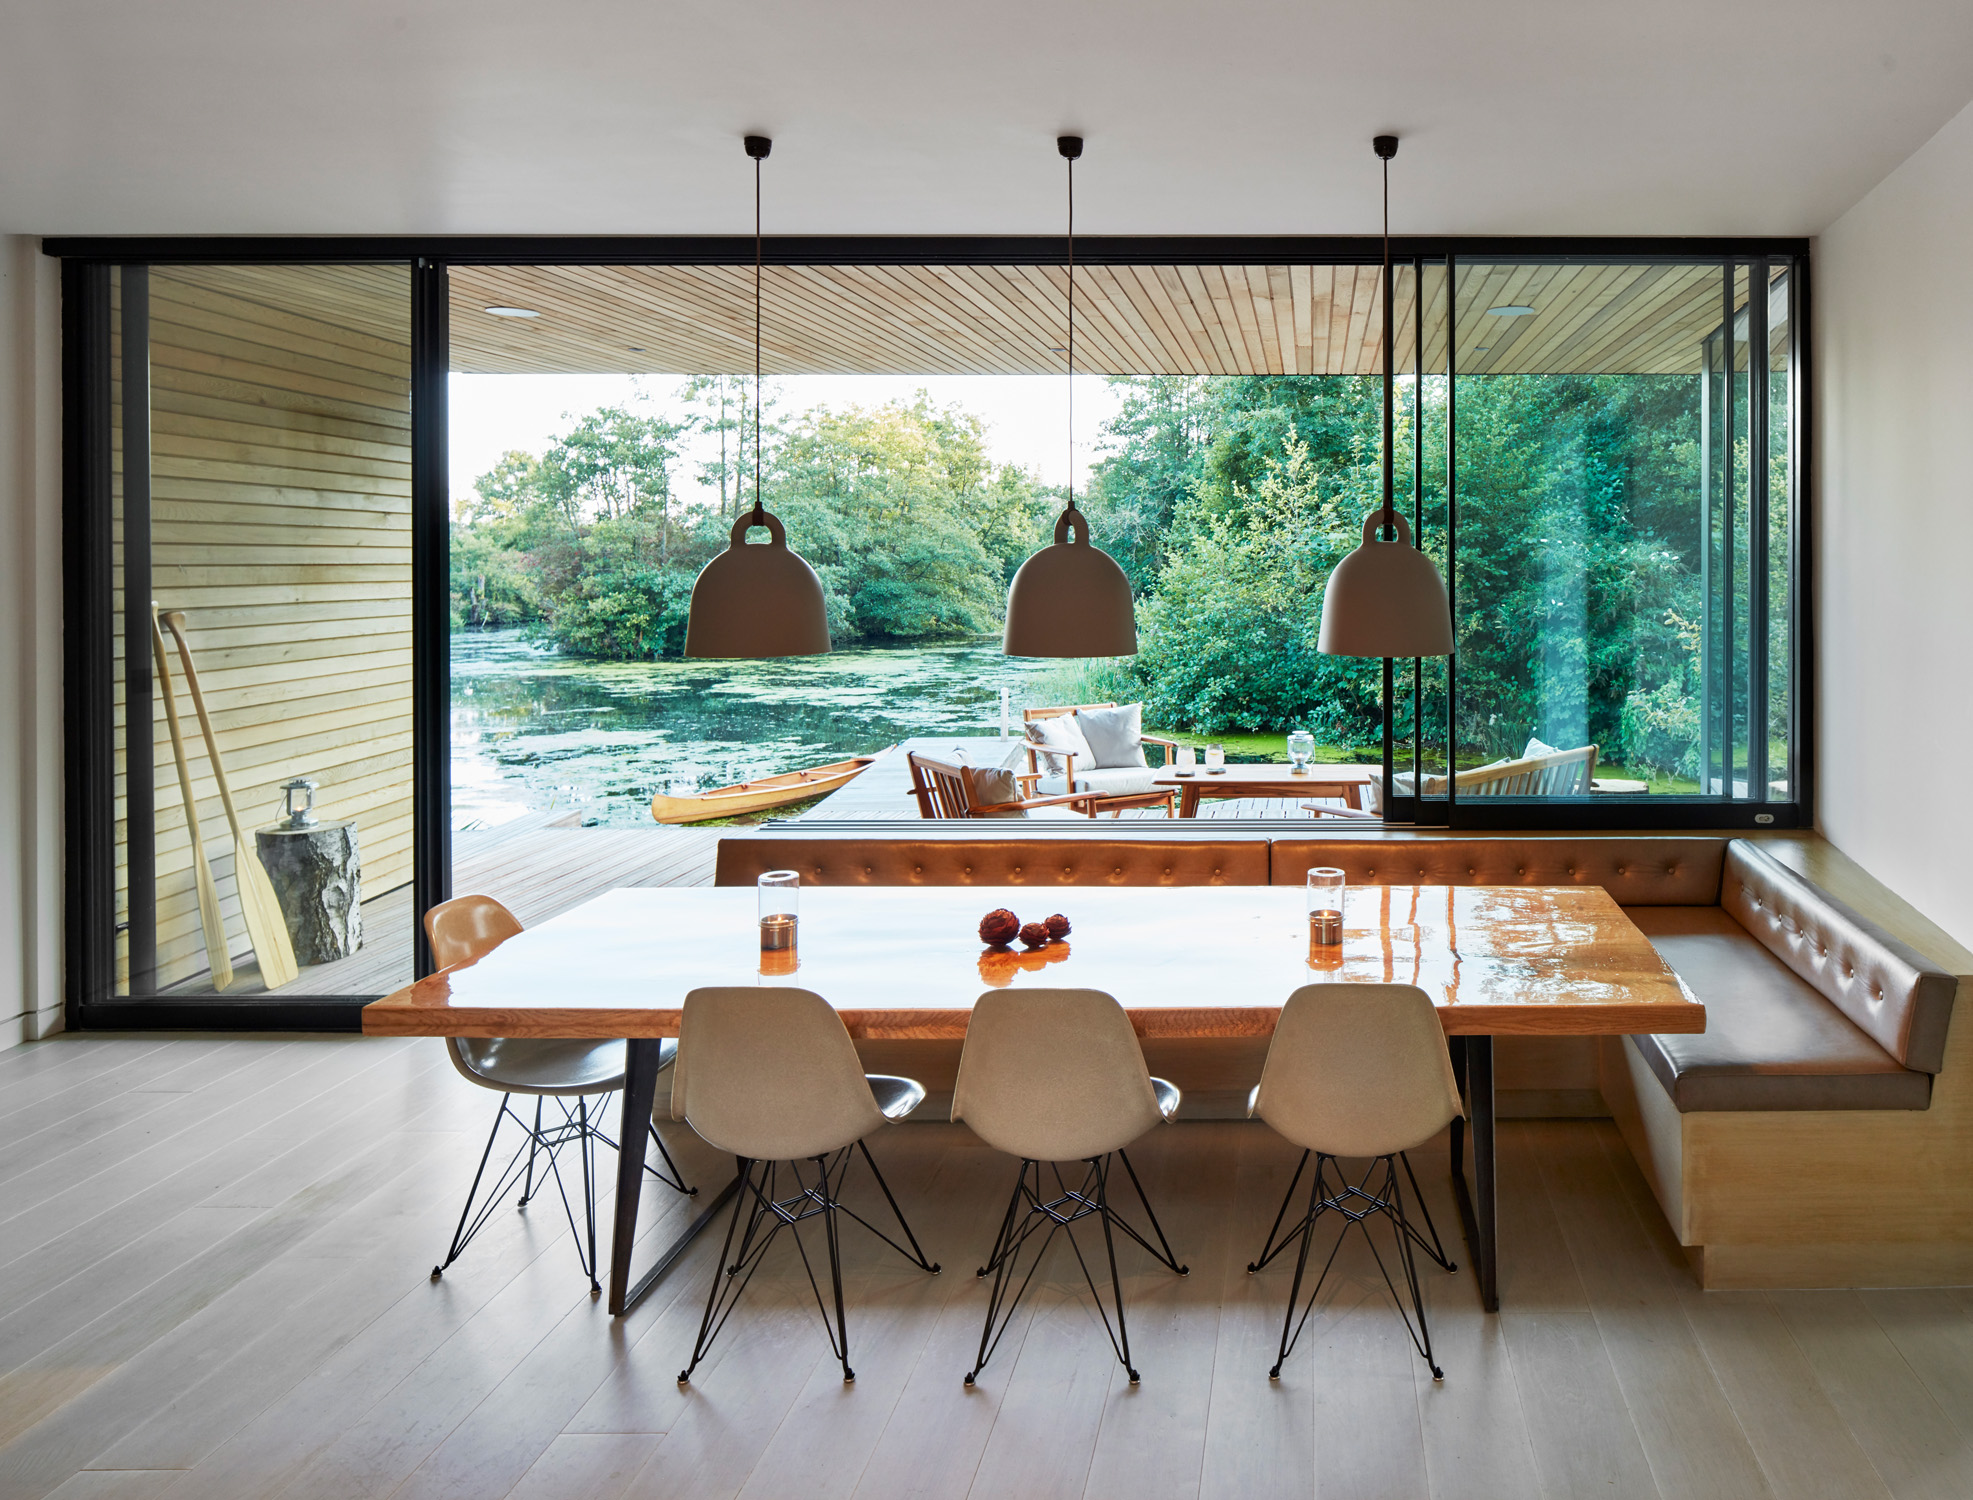 Dining table by by Platform 5 Architects - contemporary architecture and design studio in London